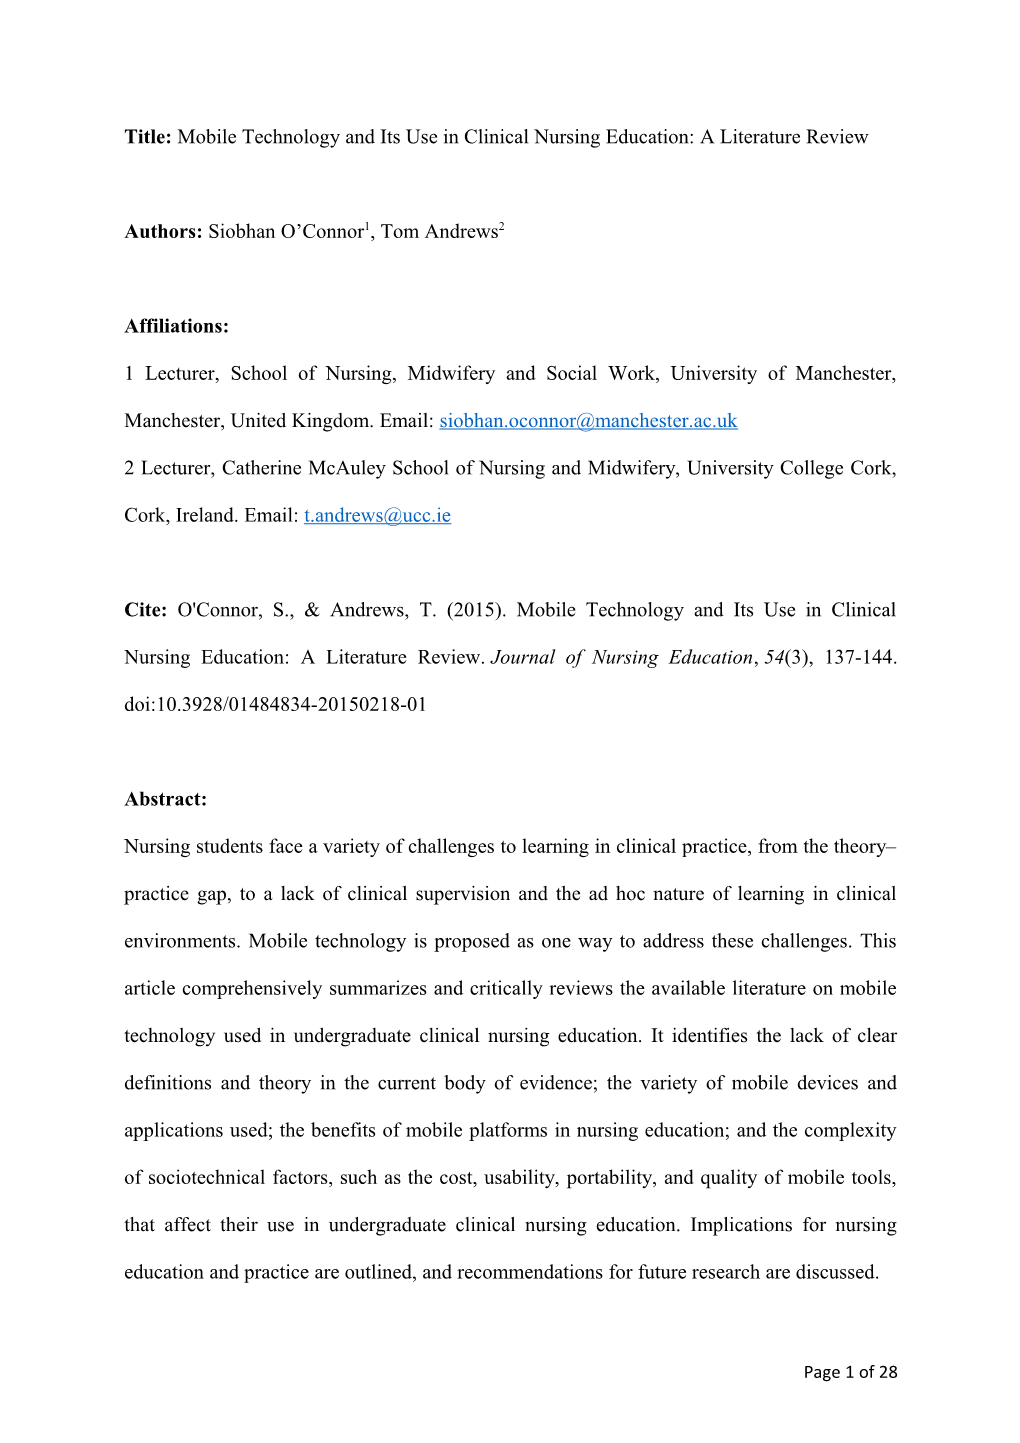 Title: Mobile Technology and Its Use in Clinical Nursing Education: a Literature Review